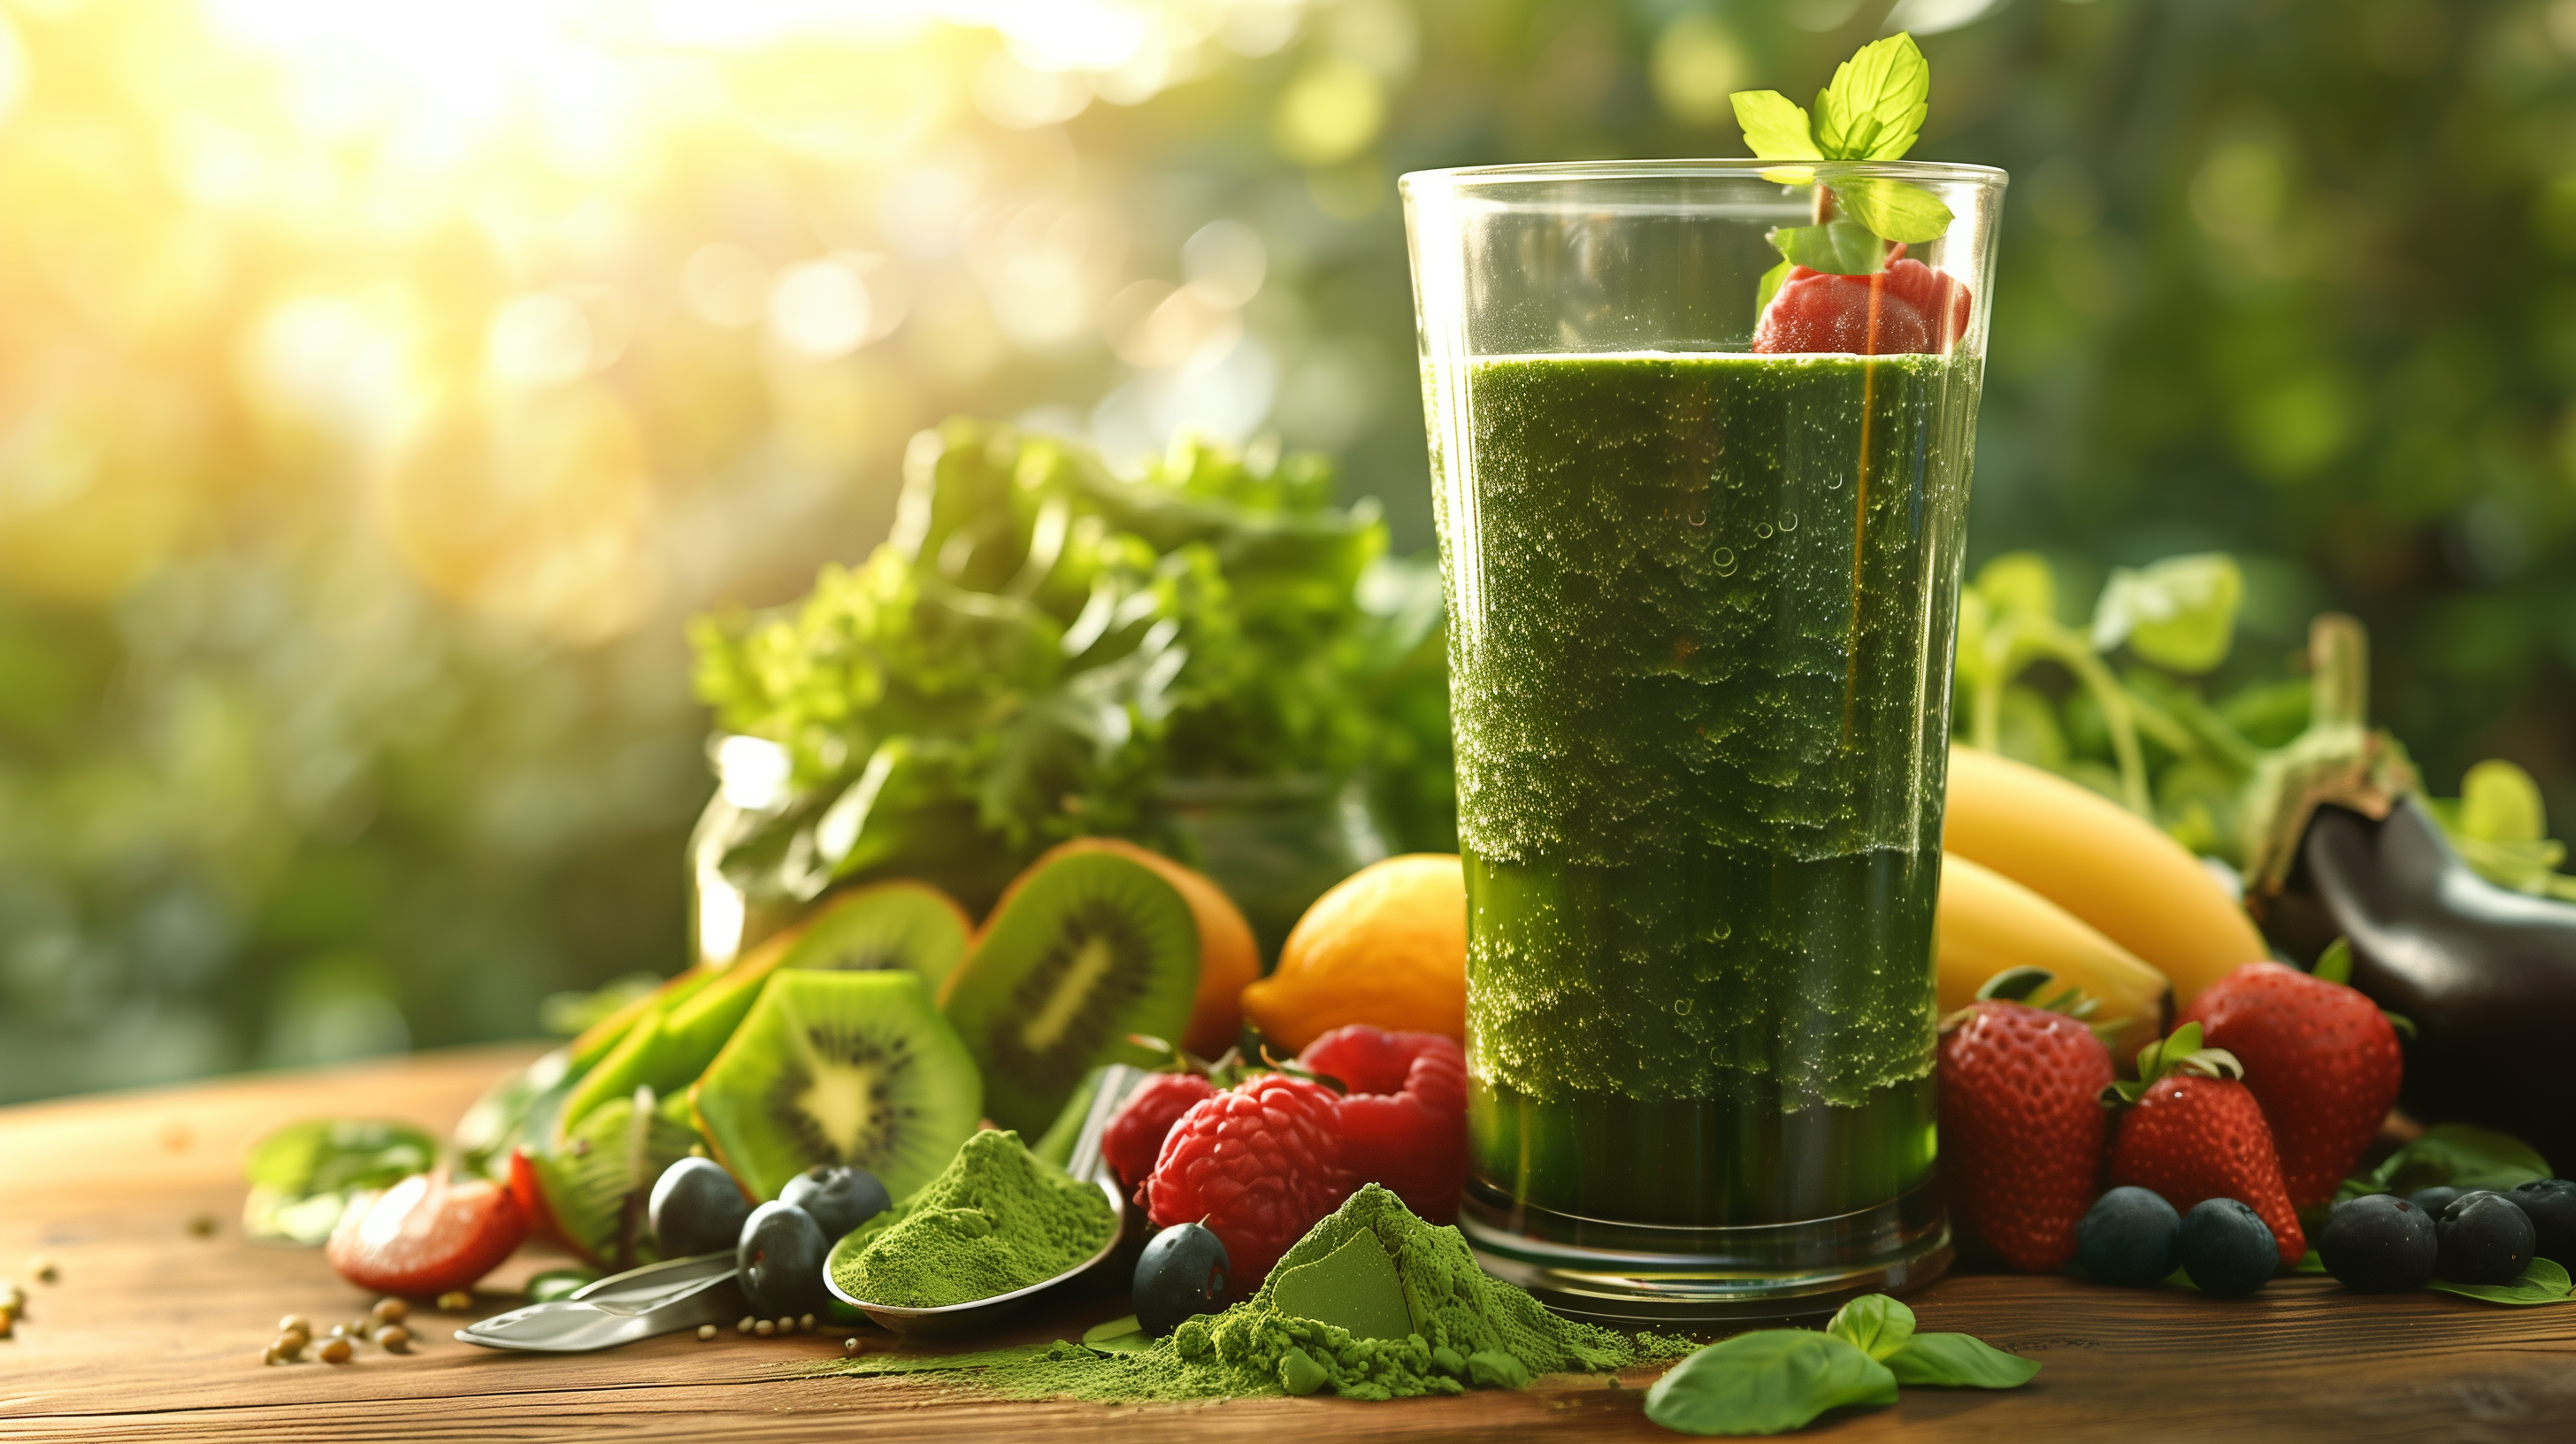 green smoothie in a clear glass, surrounded by whole fruits, vegetables